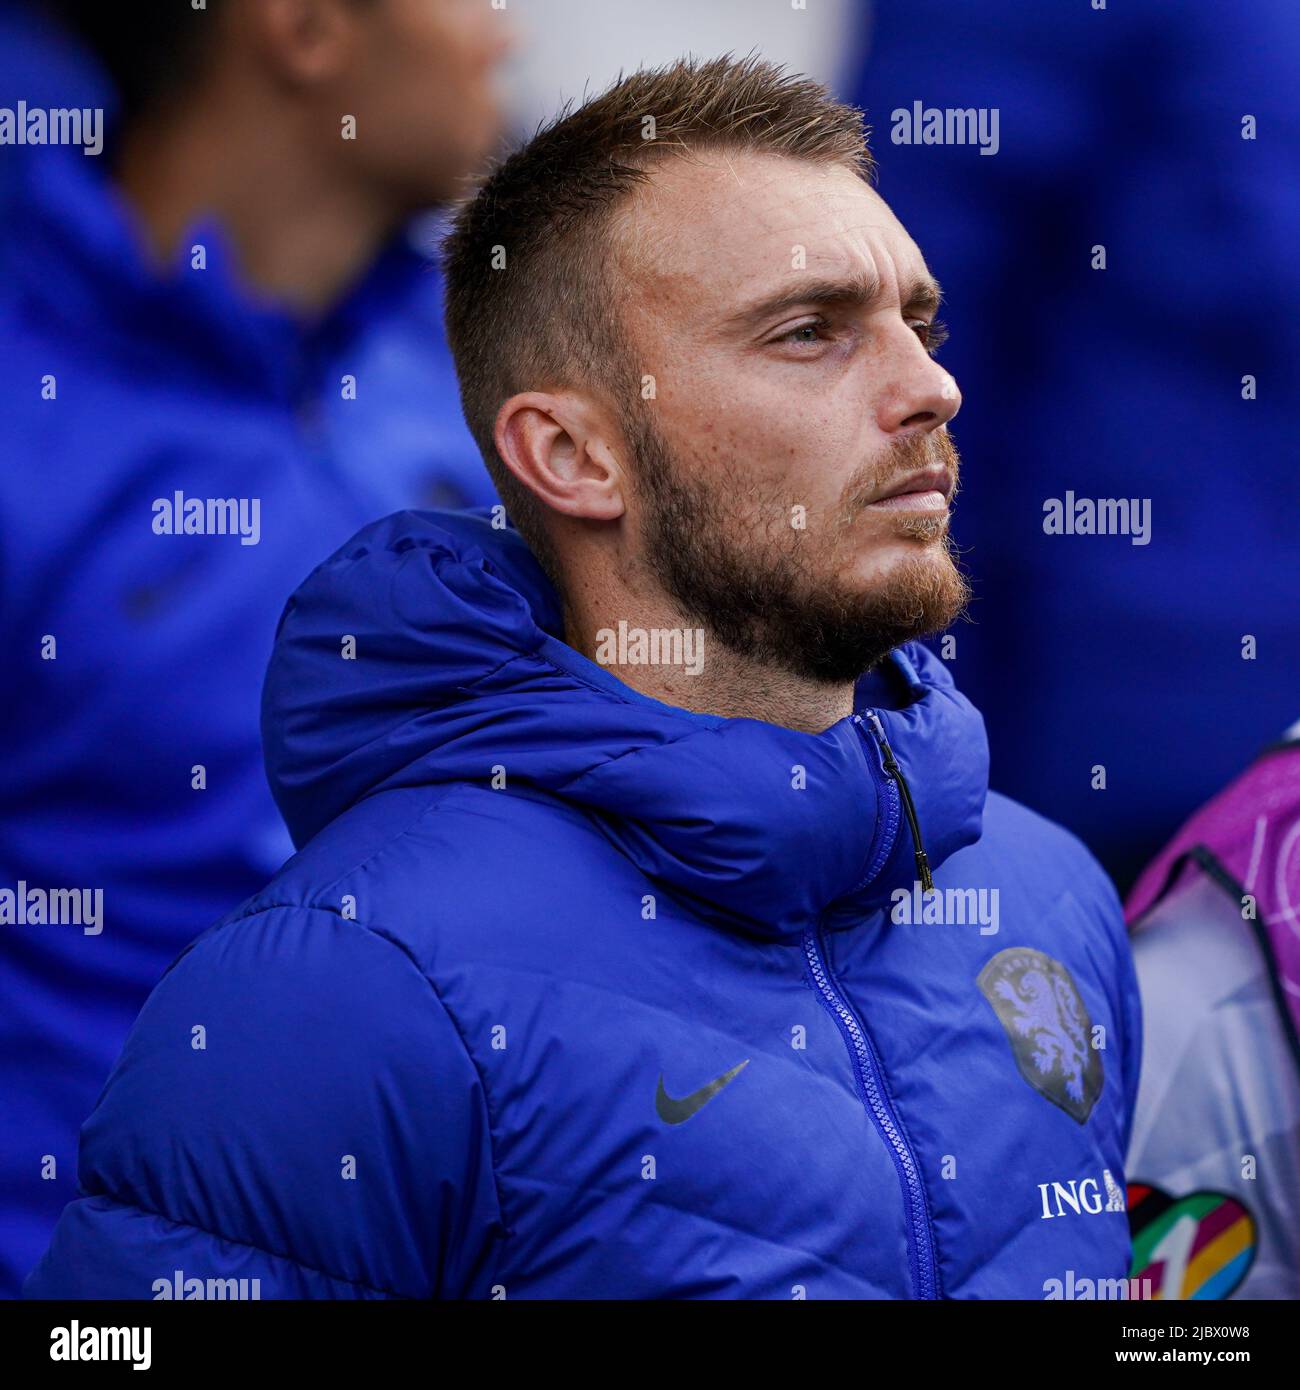 CARDIFF, WALES - JUNE 8: goalkeeper Jasper Cillessen of The Netherlands during the UEFA Nations League match between Wales and The Netherlands at Cardiff City Stadium on June 8, 2022 in Cardiff, Wales (Photo by Andre Weening/Orange Pictures) Stock Photo